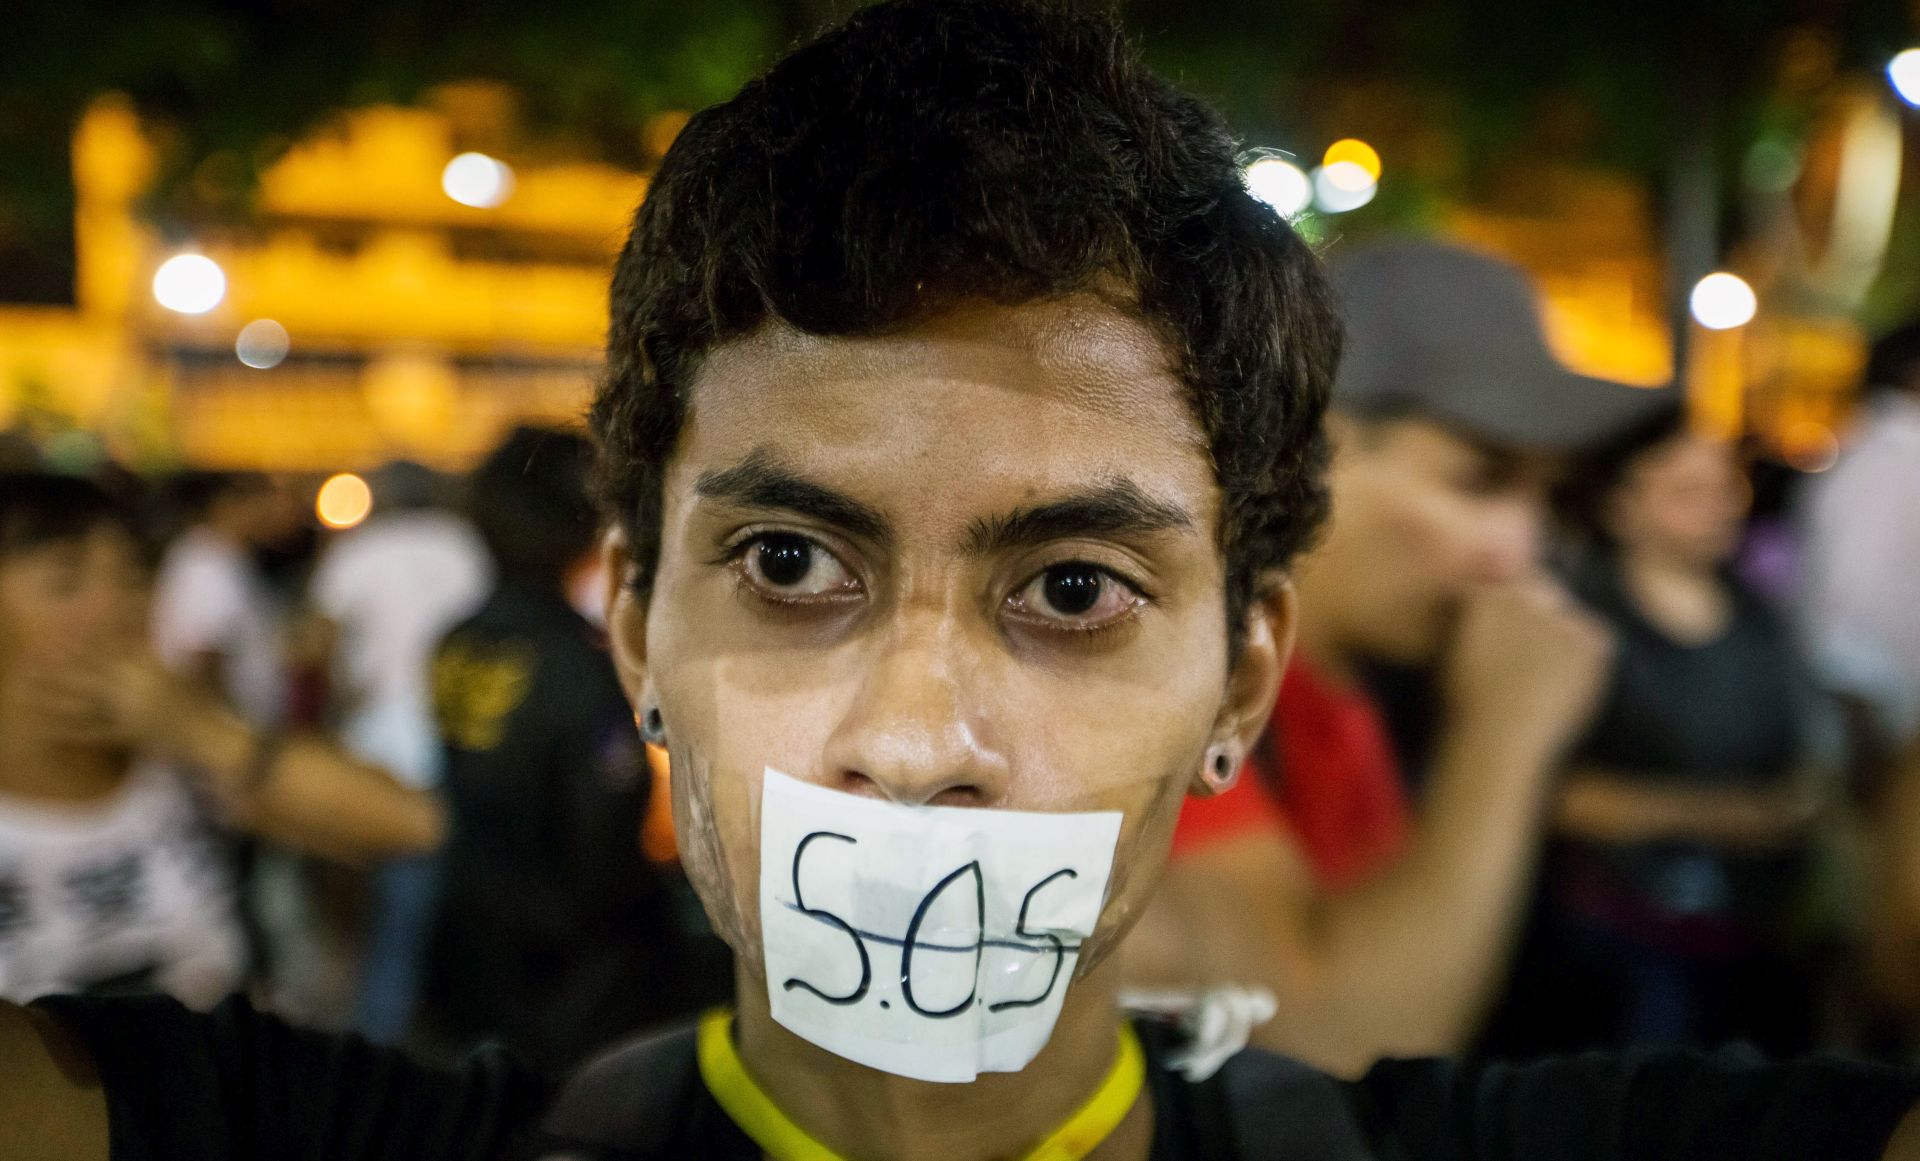 epa05936379 A woman covers her mouth with a sign reading 'S.O.S.' (the international Morse code distress signal) during vigil in Caracas, Venezuela, 29 April 2017. Venezuelan students held a 12-hour vigil in honor of people whom lost their lives during the recent anti-government rallies, while opposition parties called for another march on Monday in order to call for general elections and a new Supreme Court.  EPA/MIGUEL GUTIERREZ